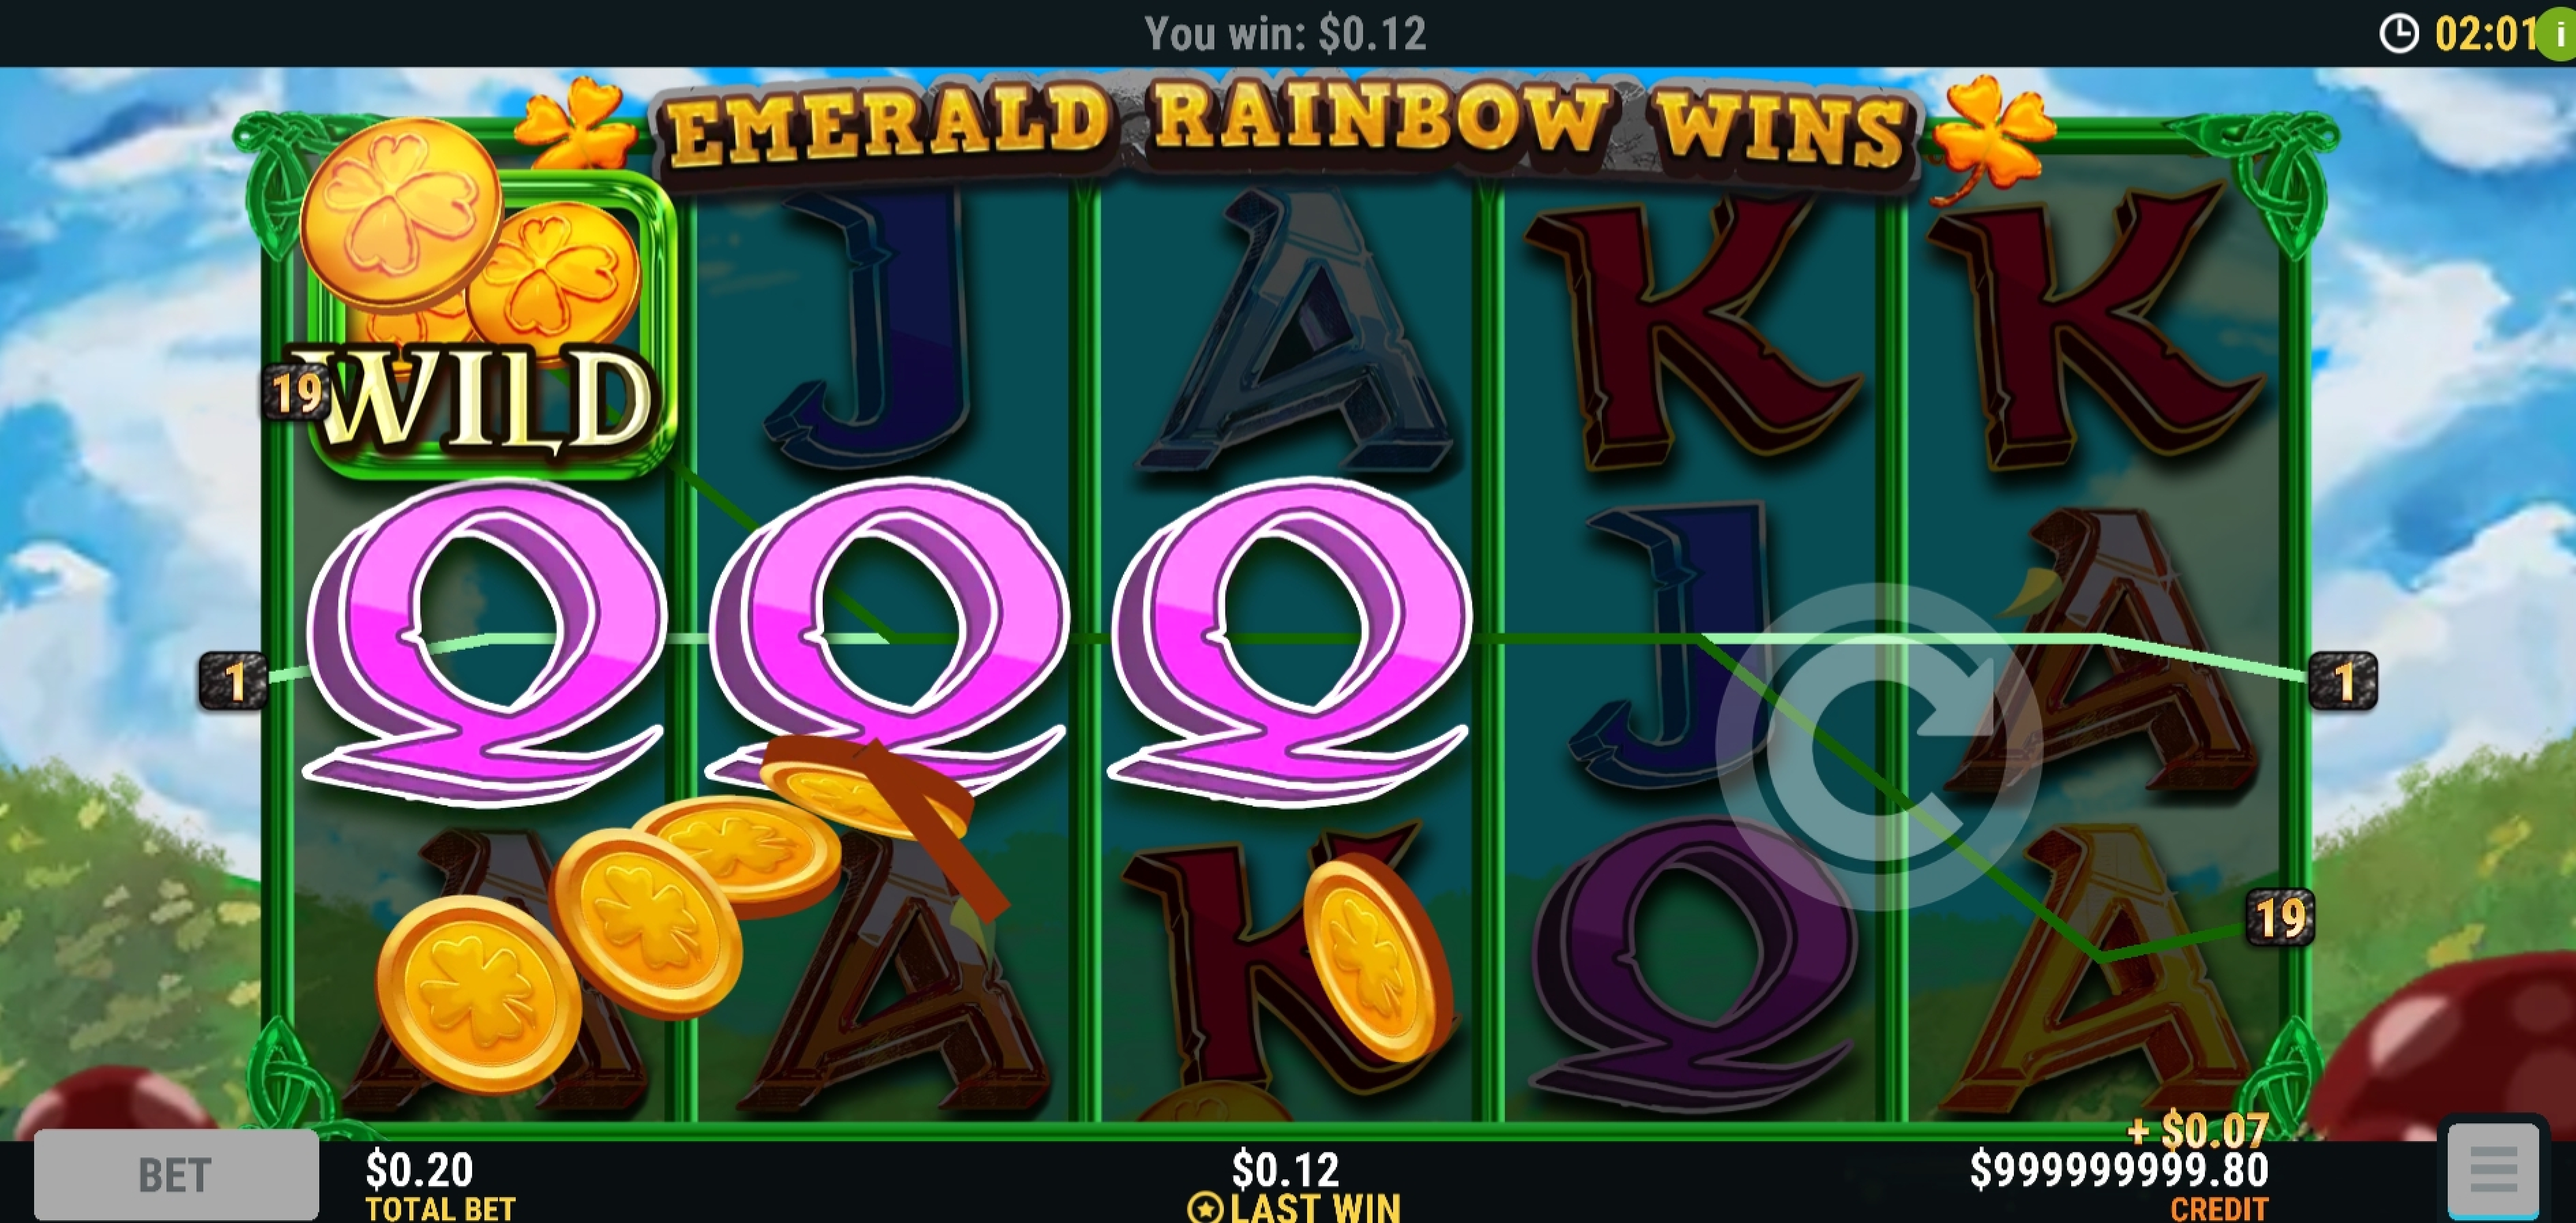 Win Money in Emerald Rainbow Wins Free Slot Game by Slot Factory